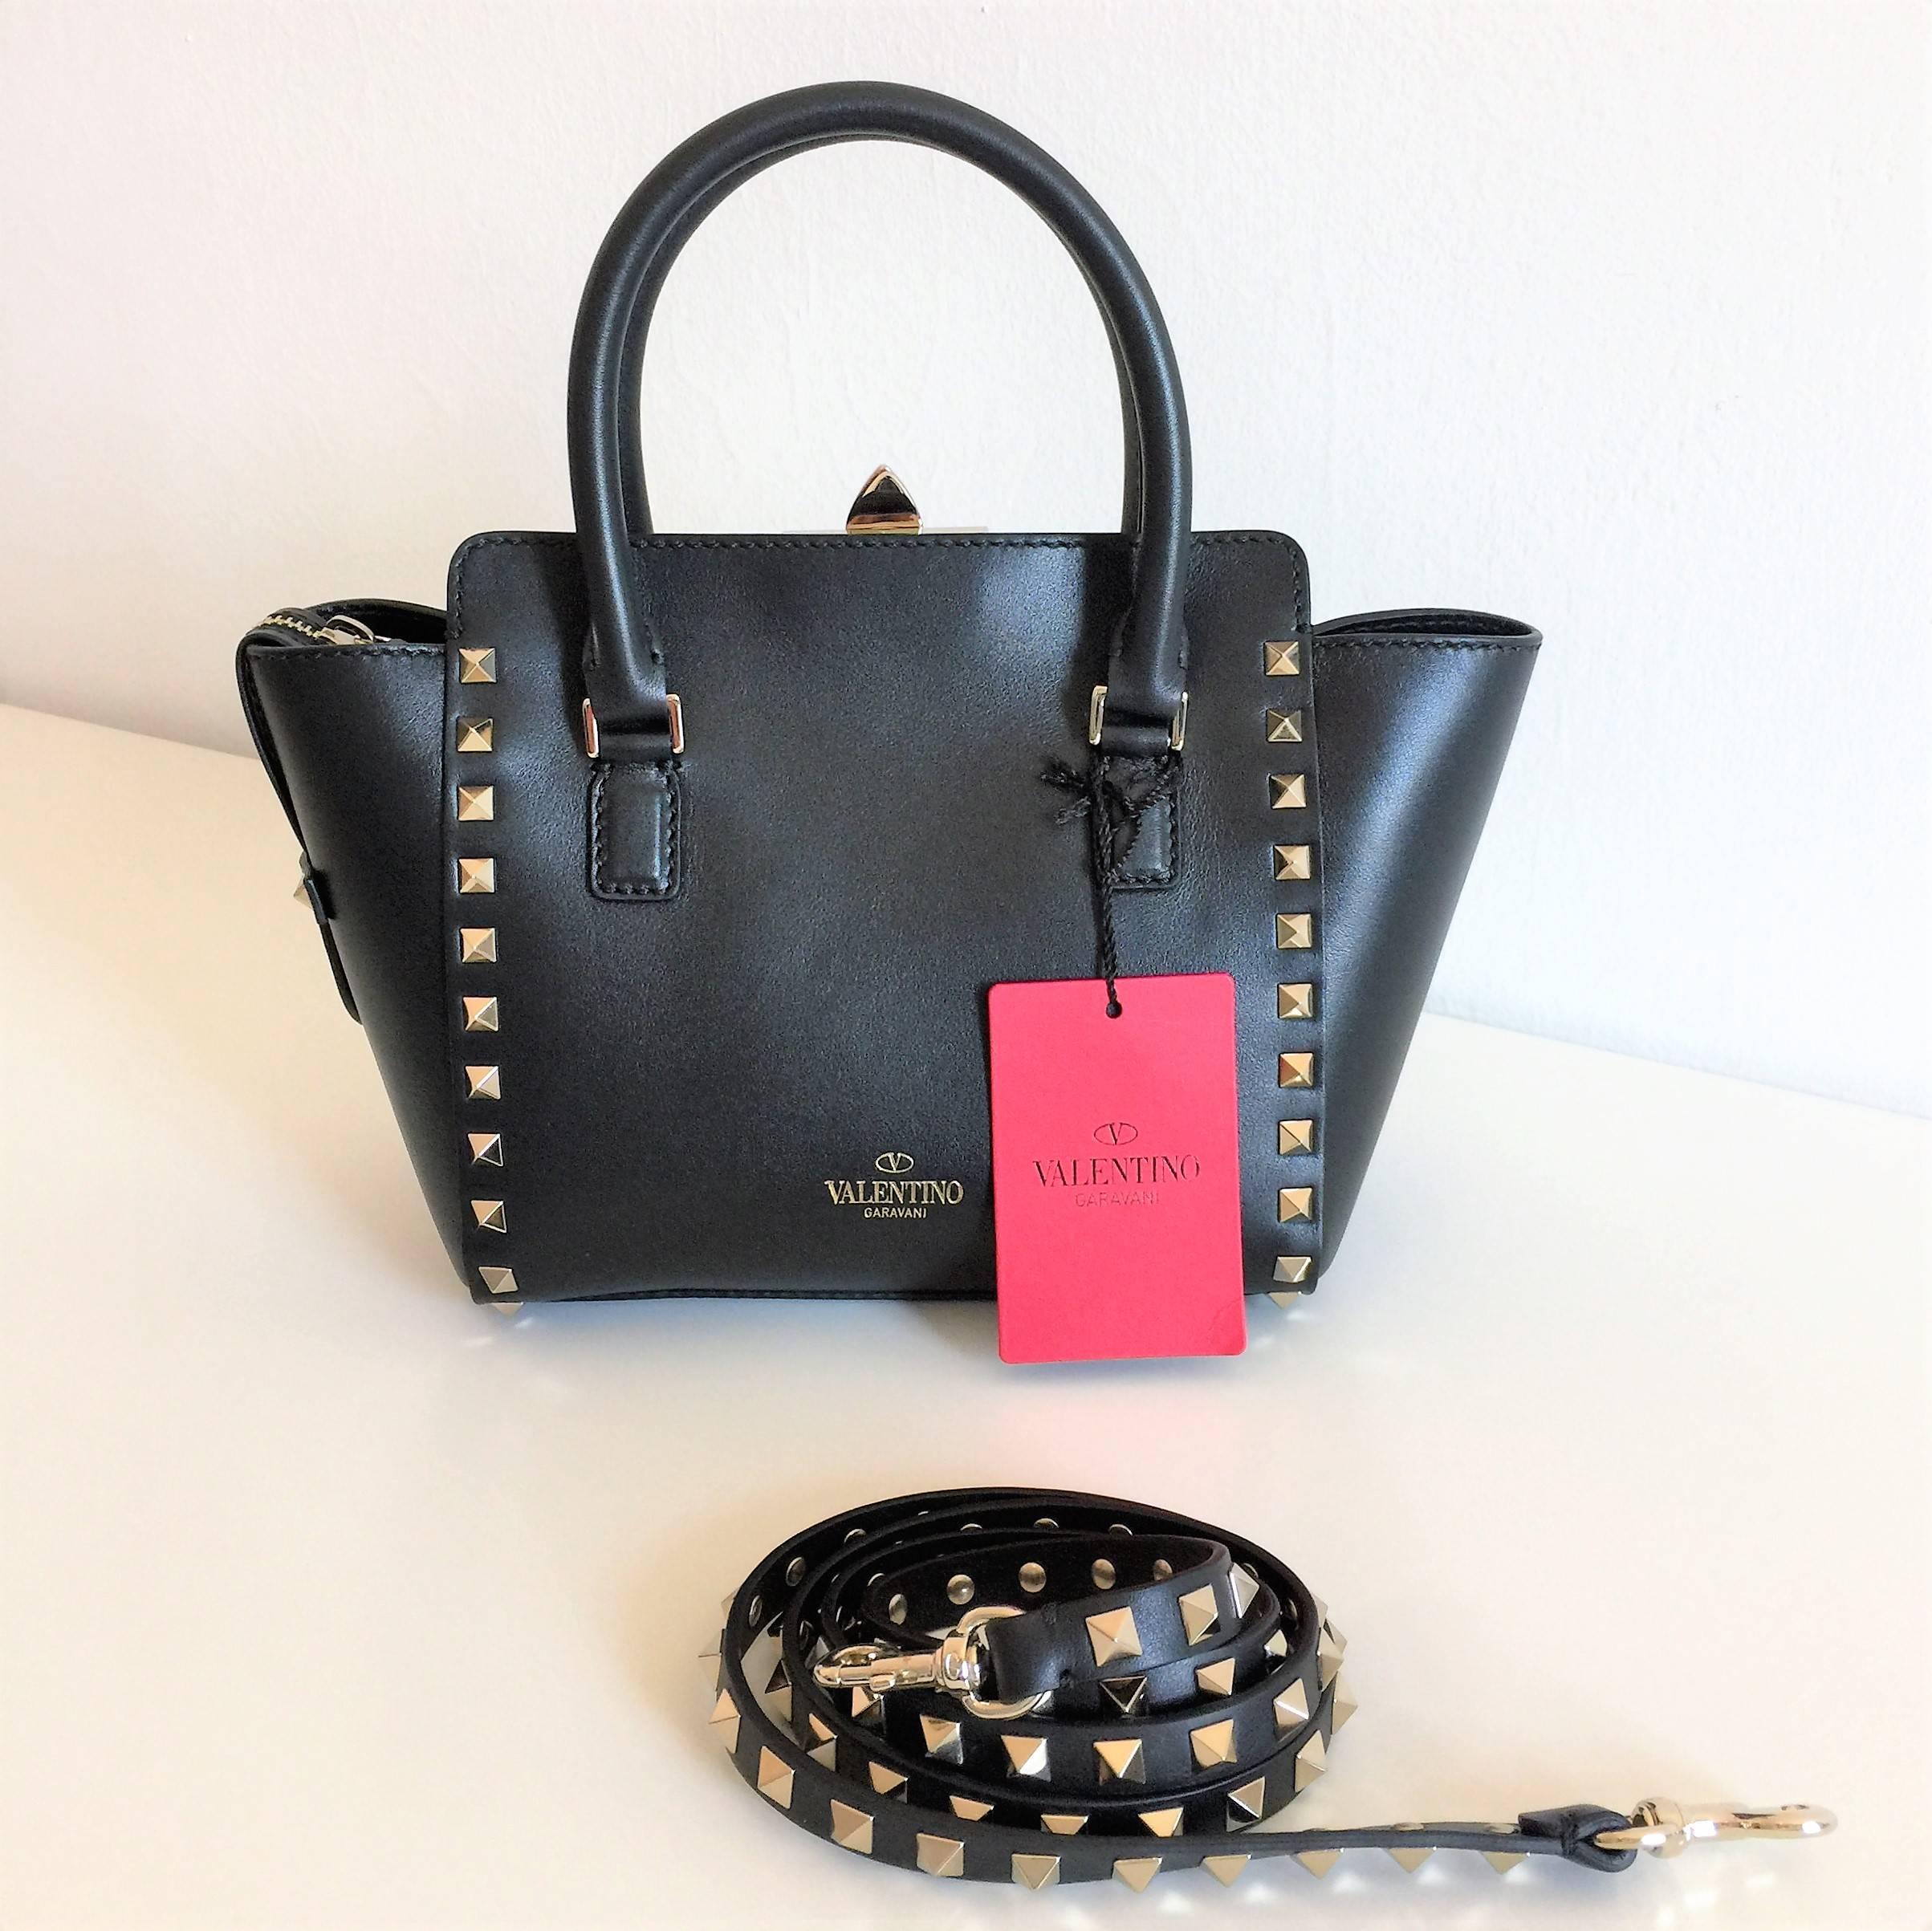 This is an unworn, new with tag, Valentino Garavani Rockstud mini, very elegant hand bag made in black leather with gold stud details. Flip lock closure and zip closure. Detachable studded strap. Cotton lining. Internal open pocket. Gold logo hot